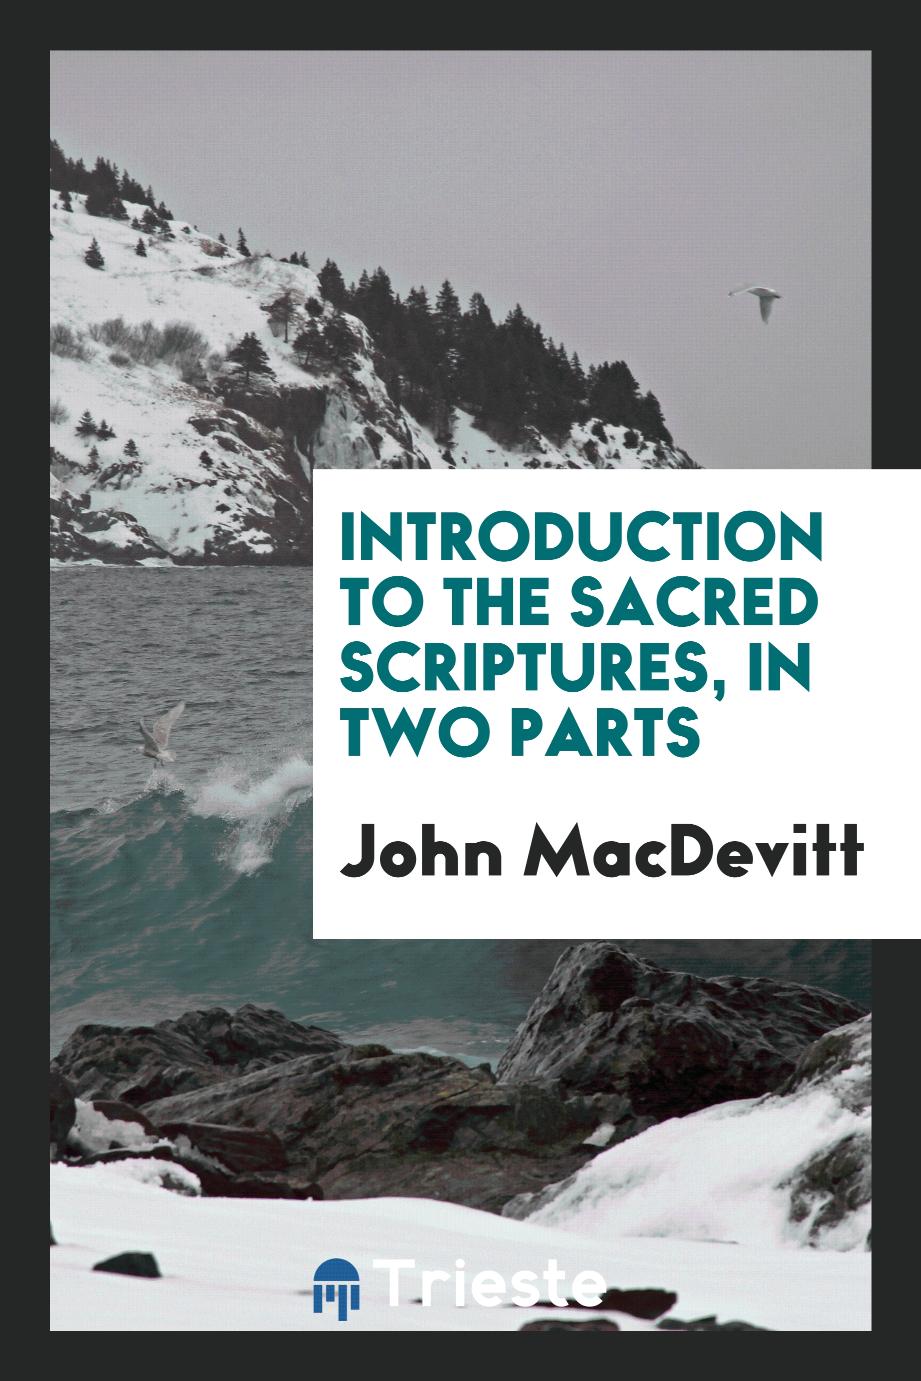 Introduction to the Sacred Scriptures, in two parts